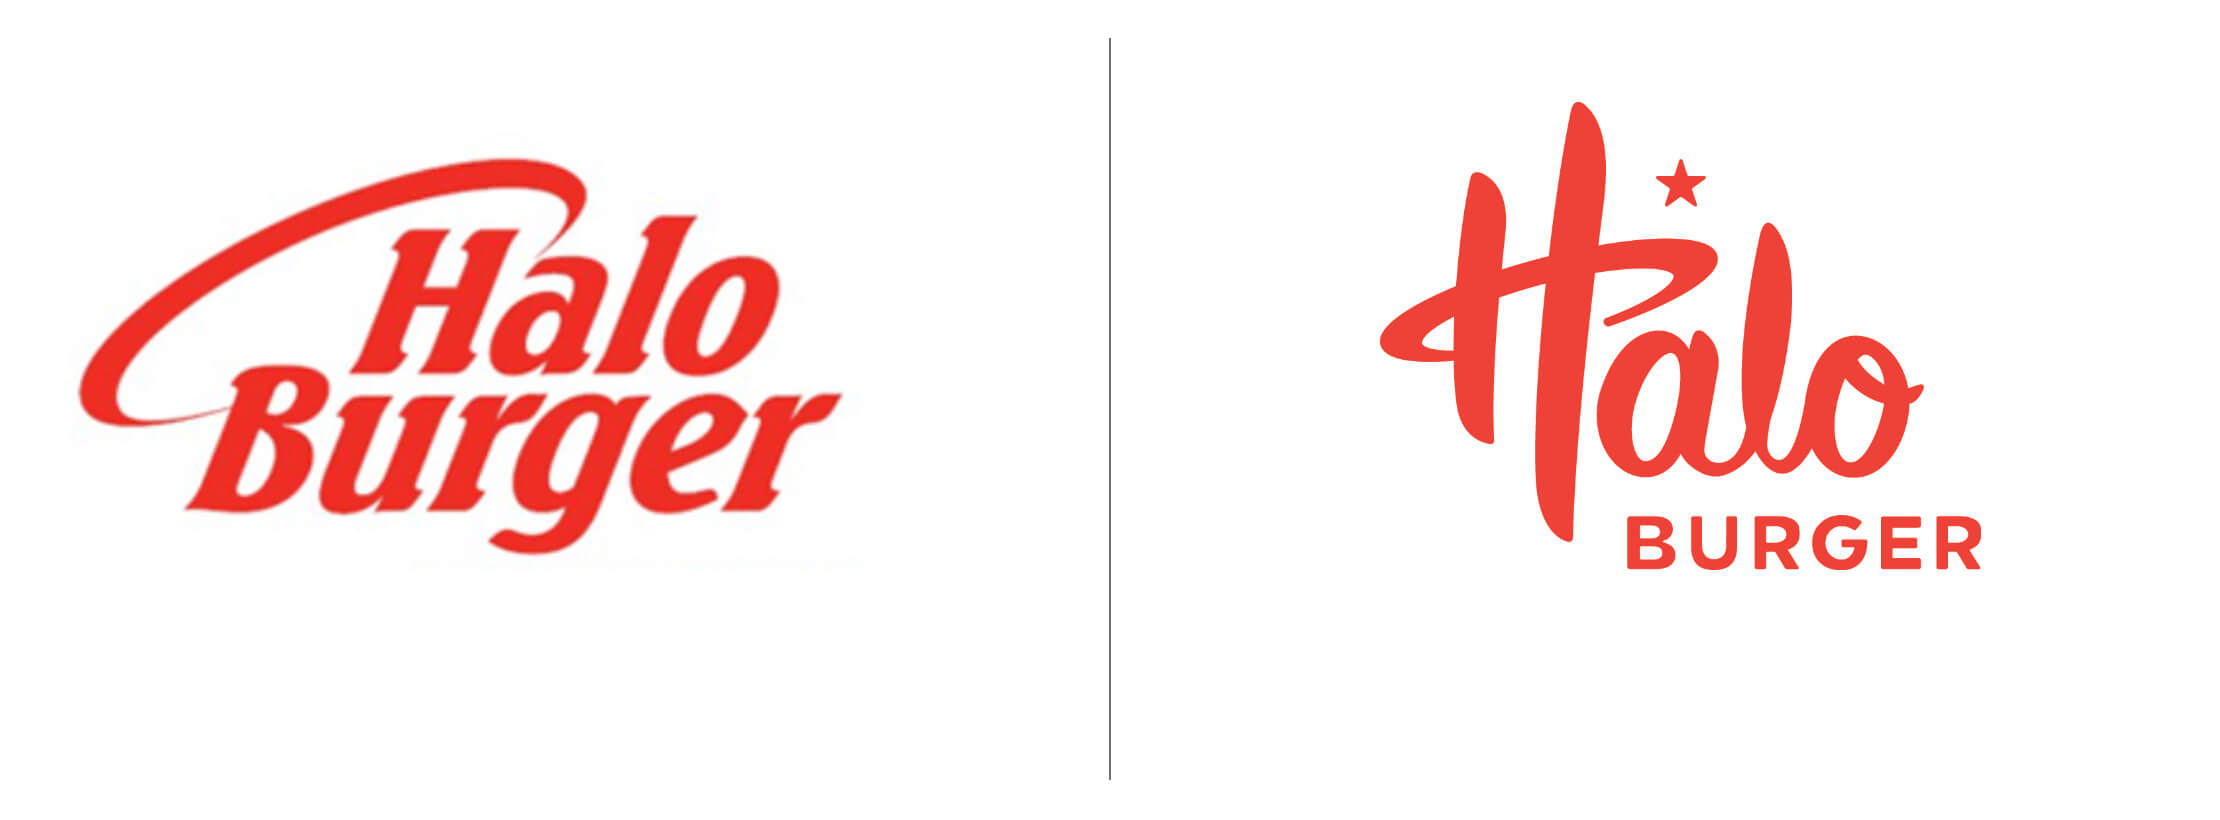 Halo Burger Brand Logo Before After